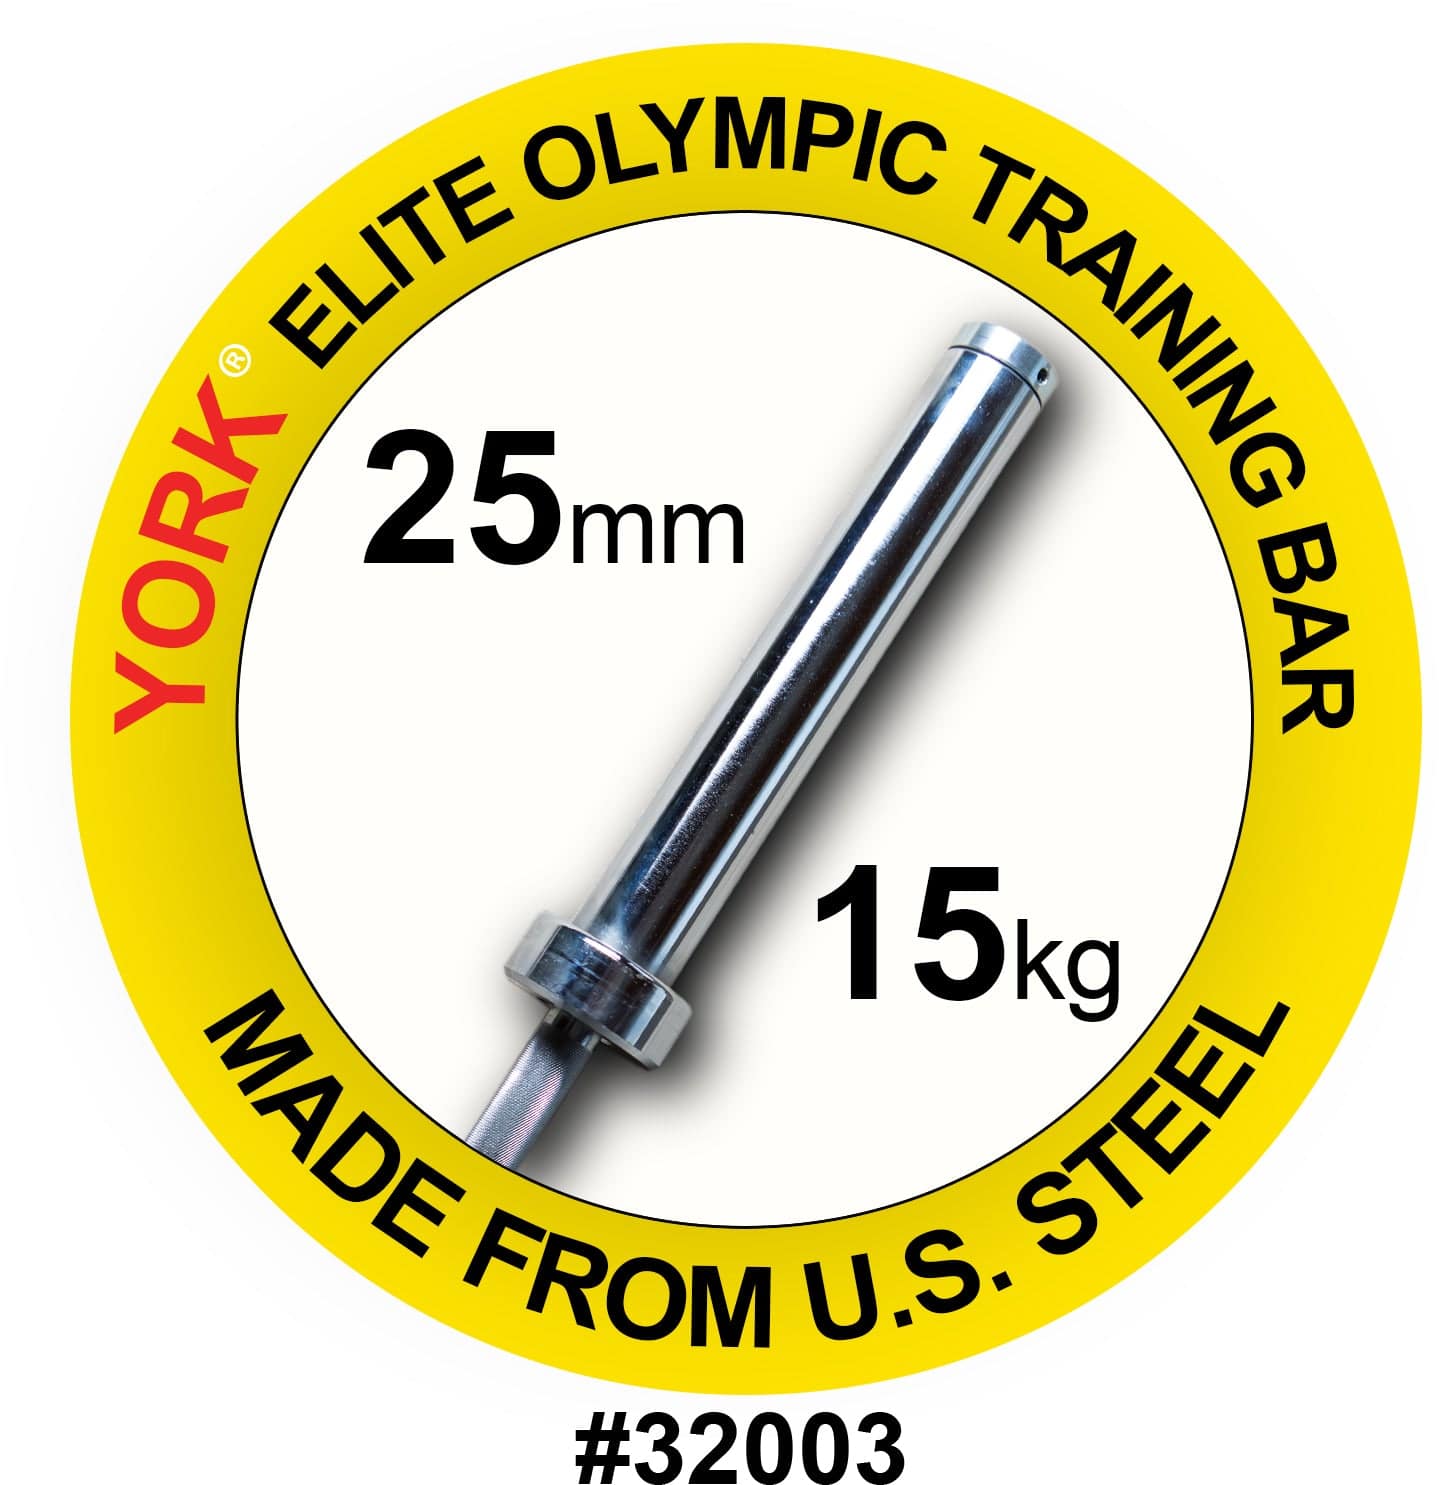 York Barbell | Women's Elite Training Bar - 25mm - XTC Fitness - Exercise Equipment Superstore - Canada - Olympic Lifting Barbell